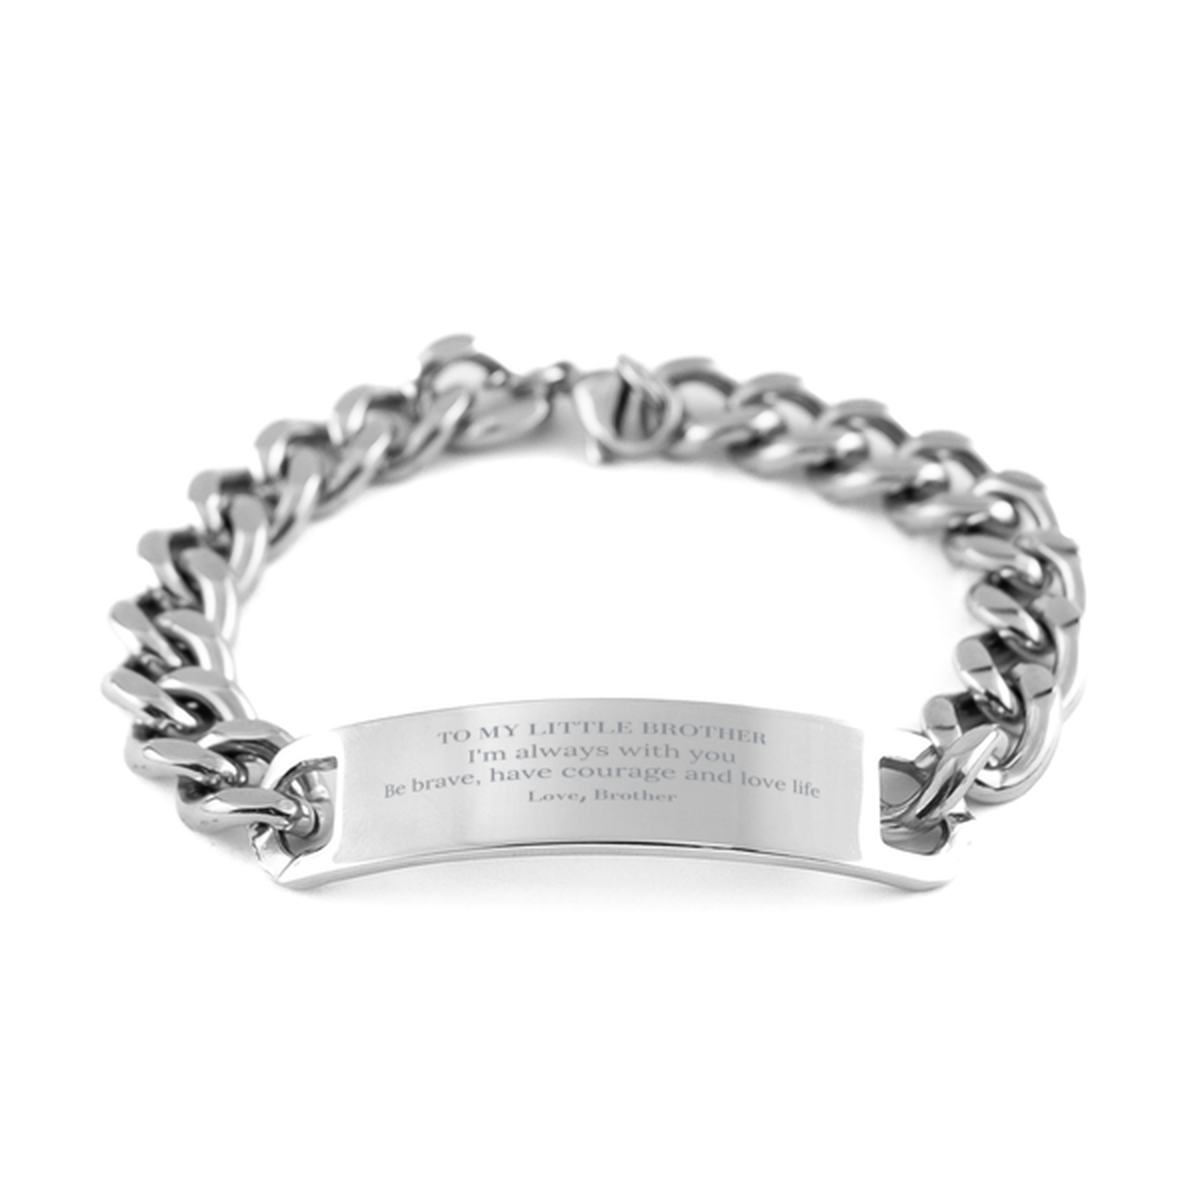 To My Little Brother Gifts from Brother, Unique Cuban Chain Stainless Steel Bracelet Inspirational Christmas Birthday Graduation Gifts for Little Brother I'm always with you. Be brave, have courage and love life. Love, Brother